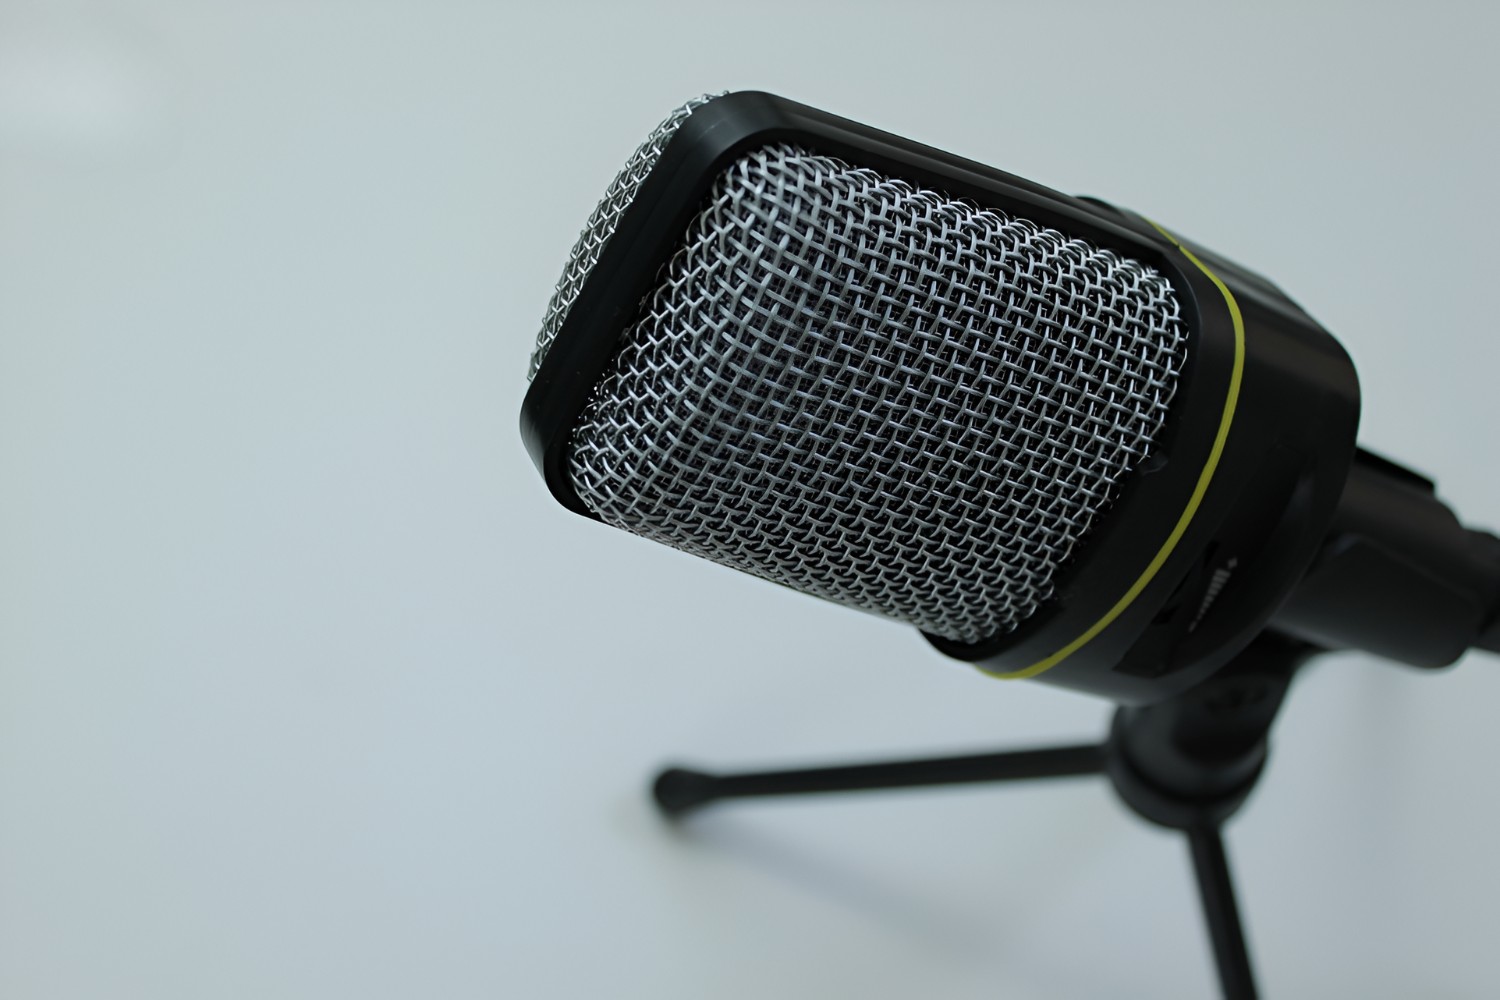 SF-920 Condenser Microphone: How To Make It Work